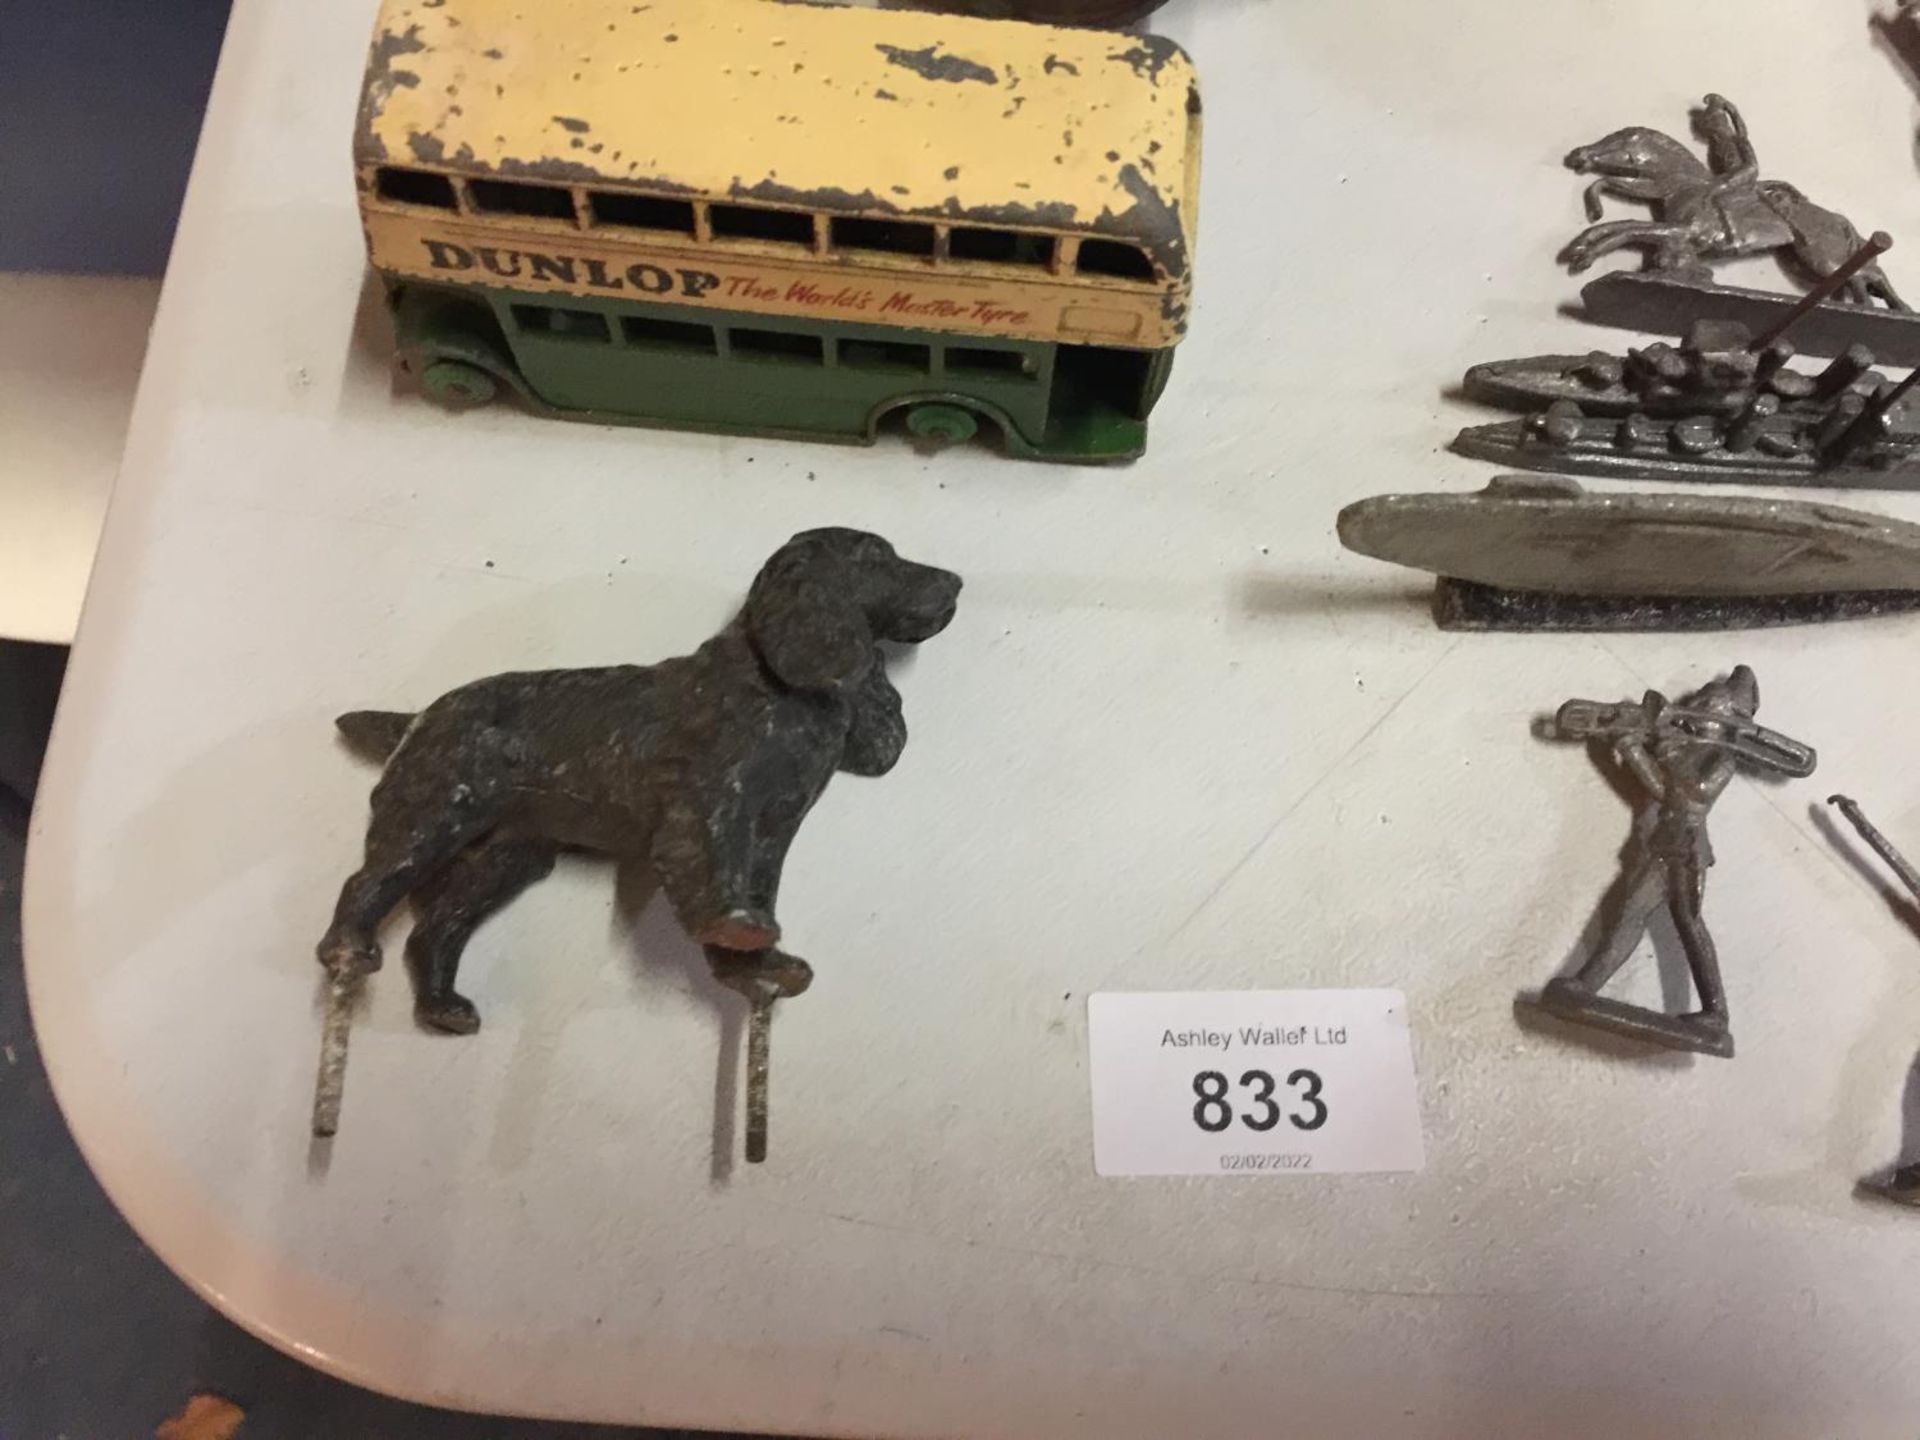 VARIOUS LEAD MILITARY TOYS, VINTAGE STEAM ROLLER, DINKY TOYS DOUBLE DECKER BUS ETC. - Image 4 of 5